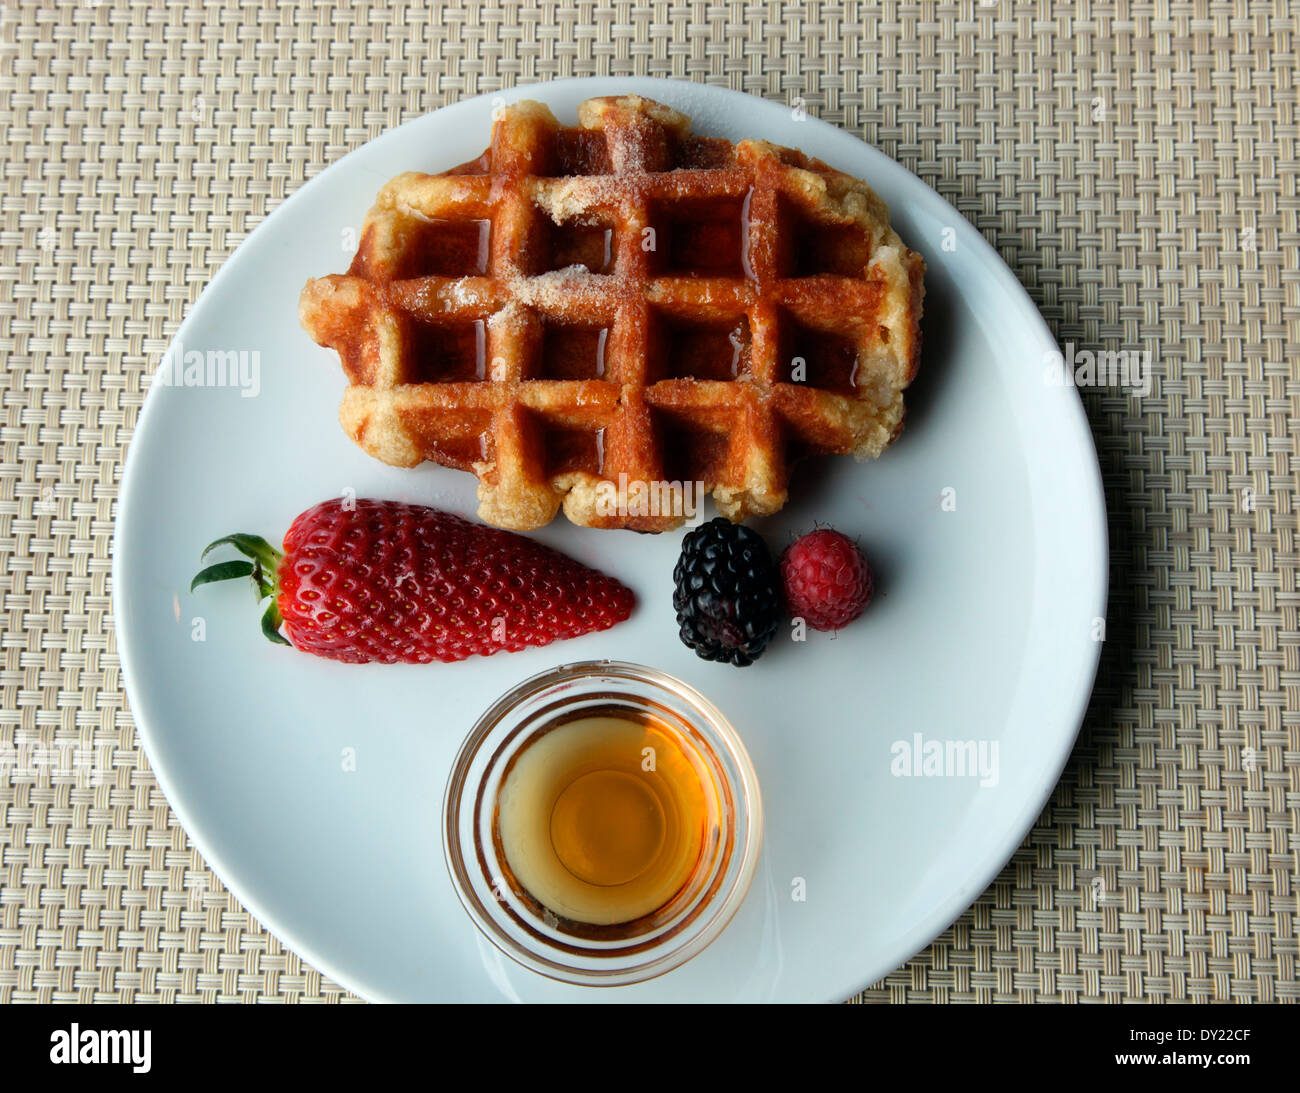 Waffle and Maple syrup with fruit Stock Photo